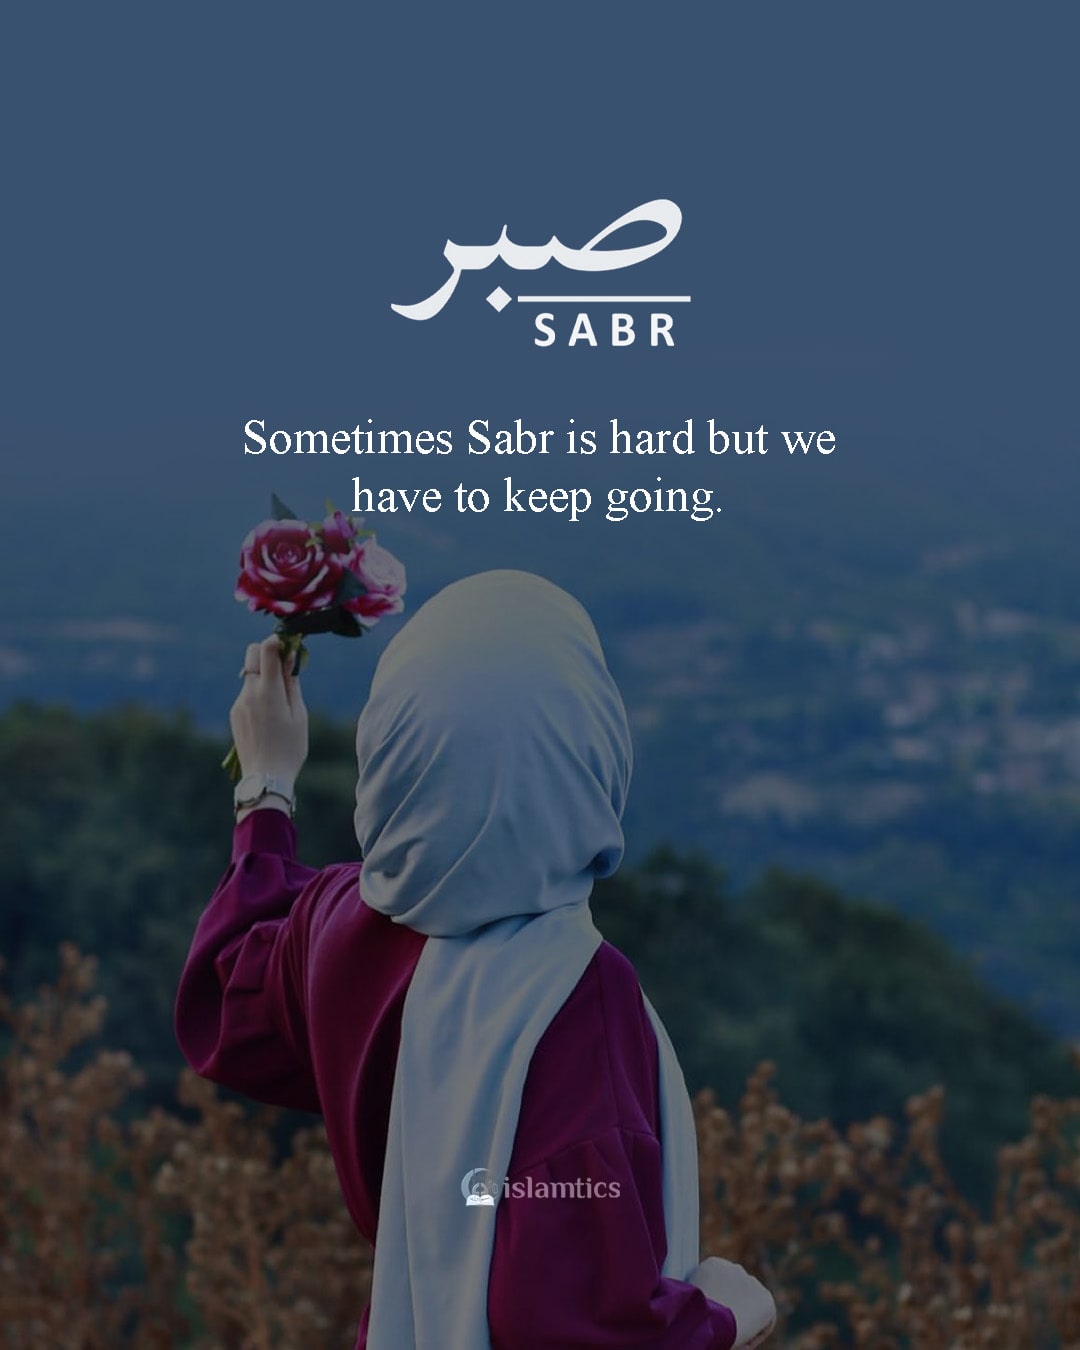 Sometimes Sabr is hard but we have to keep going. | islamtics